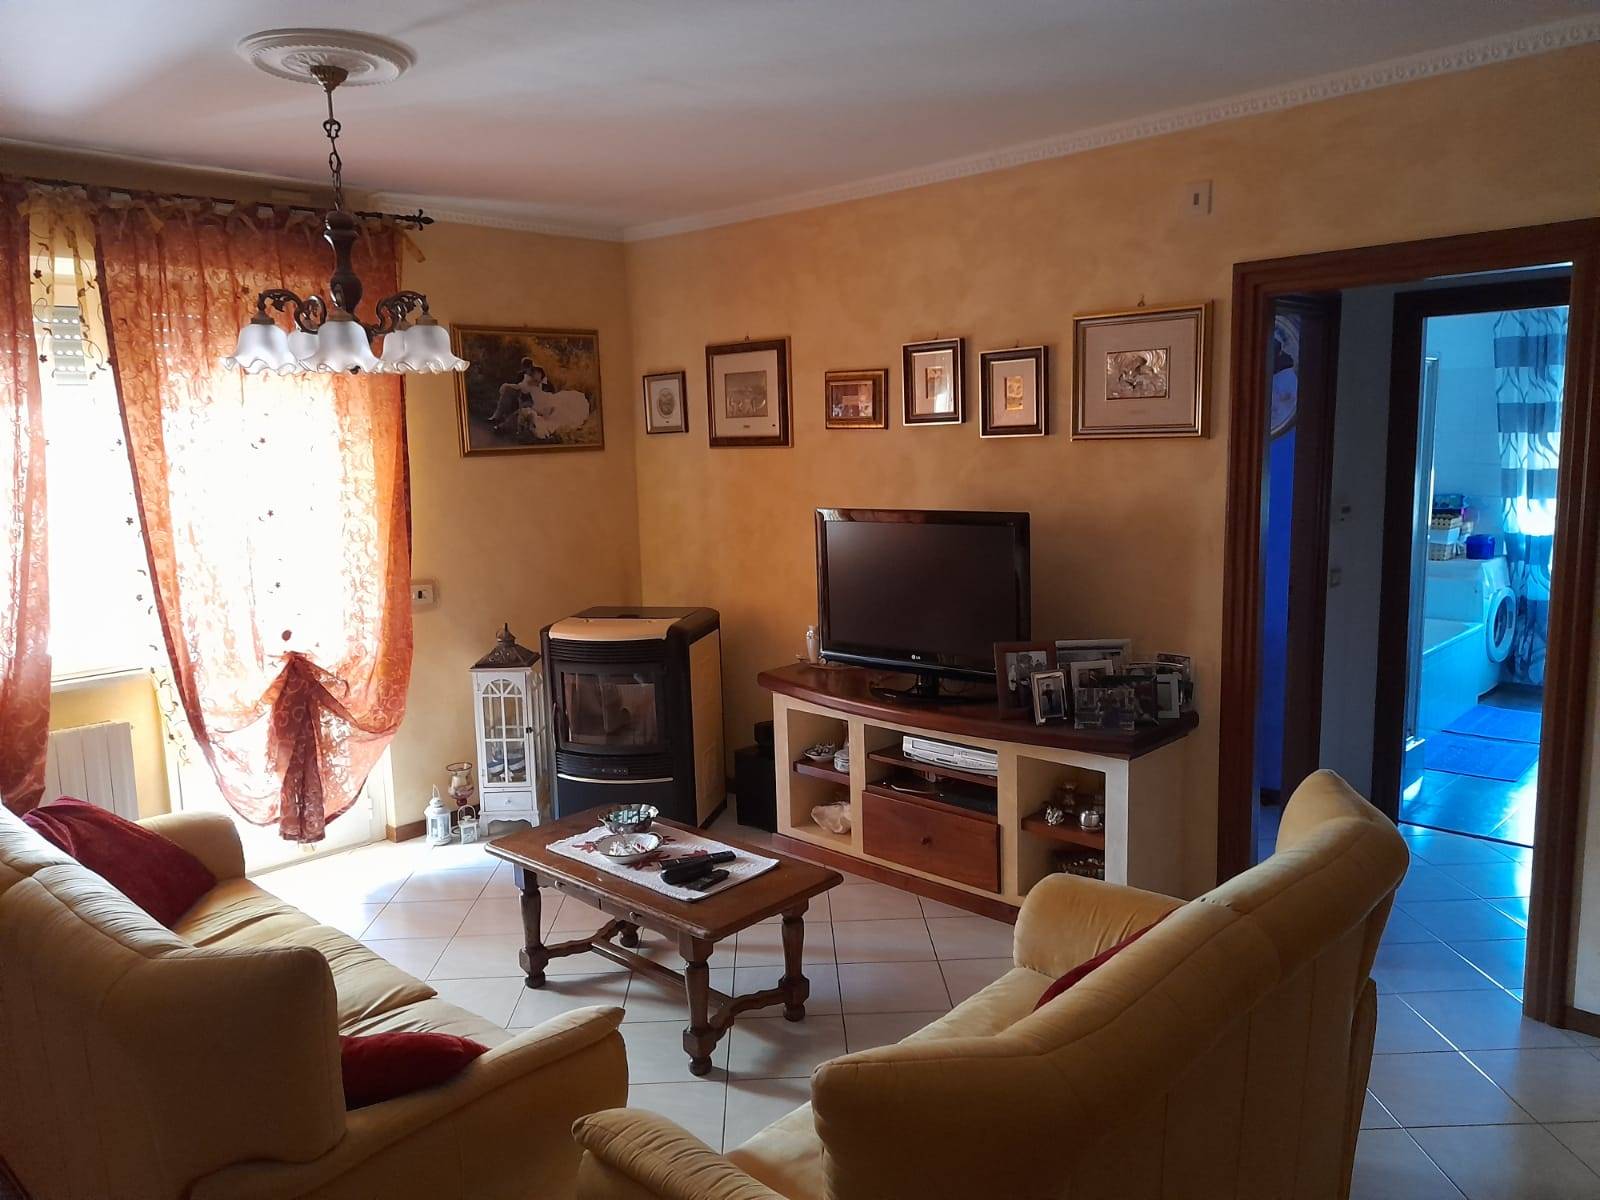 CAIRO MONTENOTTE, Apartment for sale of 126 Sq. mt., Excellent Condition, Heating Individual heating system, Energetic class: G, placed at Raised on 